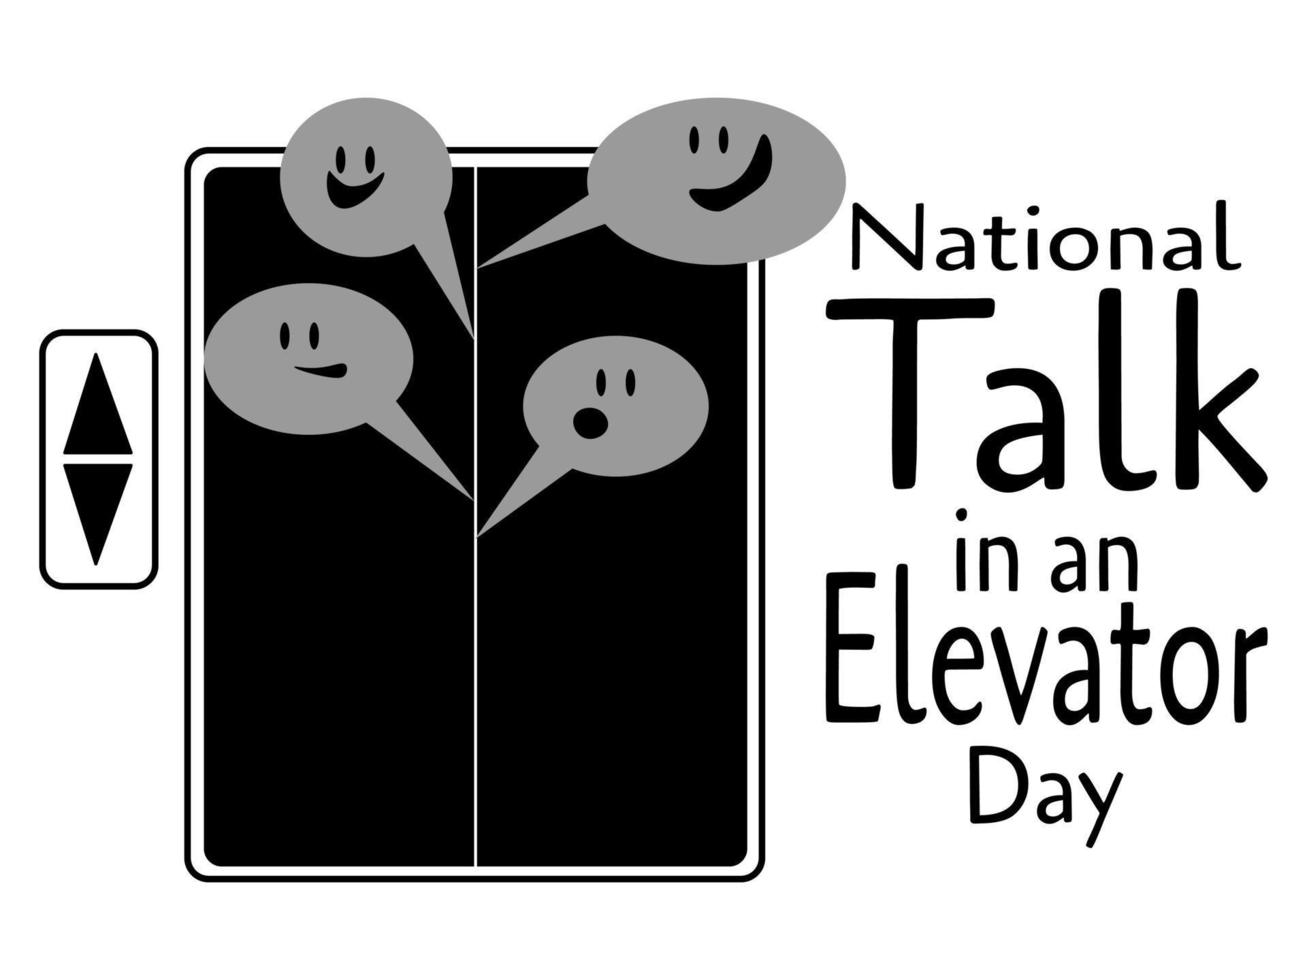 National Talk in an Eevator Day, idea for a poster, banner, flyer or postcard vector